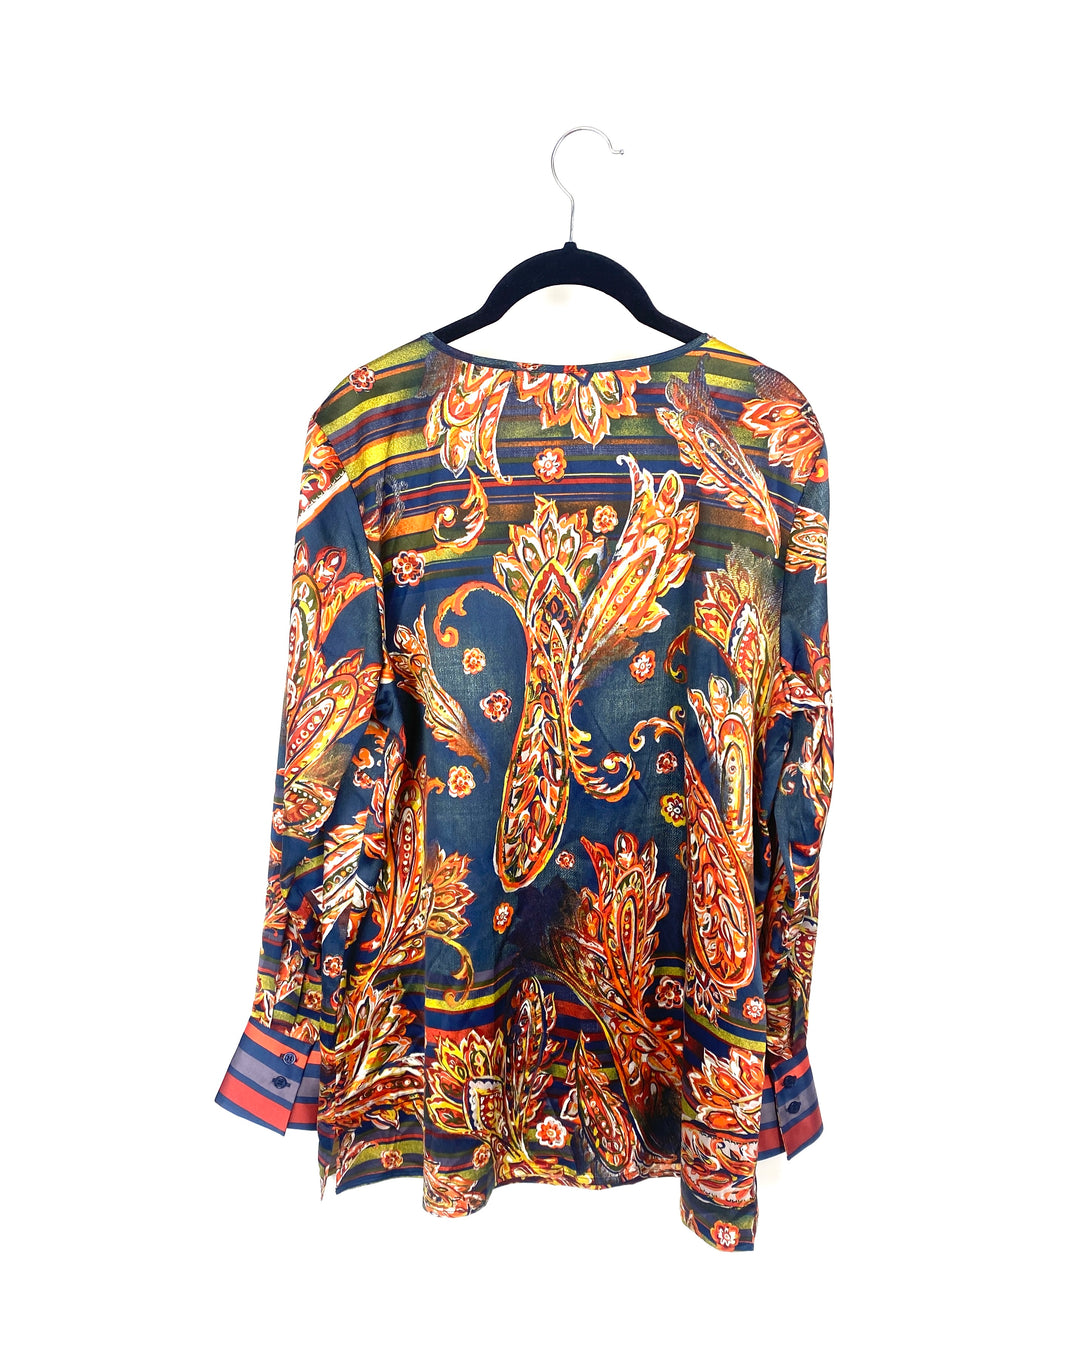 Colorful Paisley Printed Top with Buttons - Medium/Large